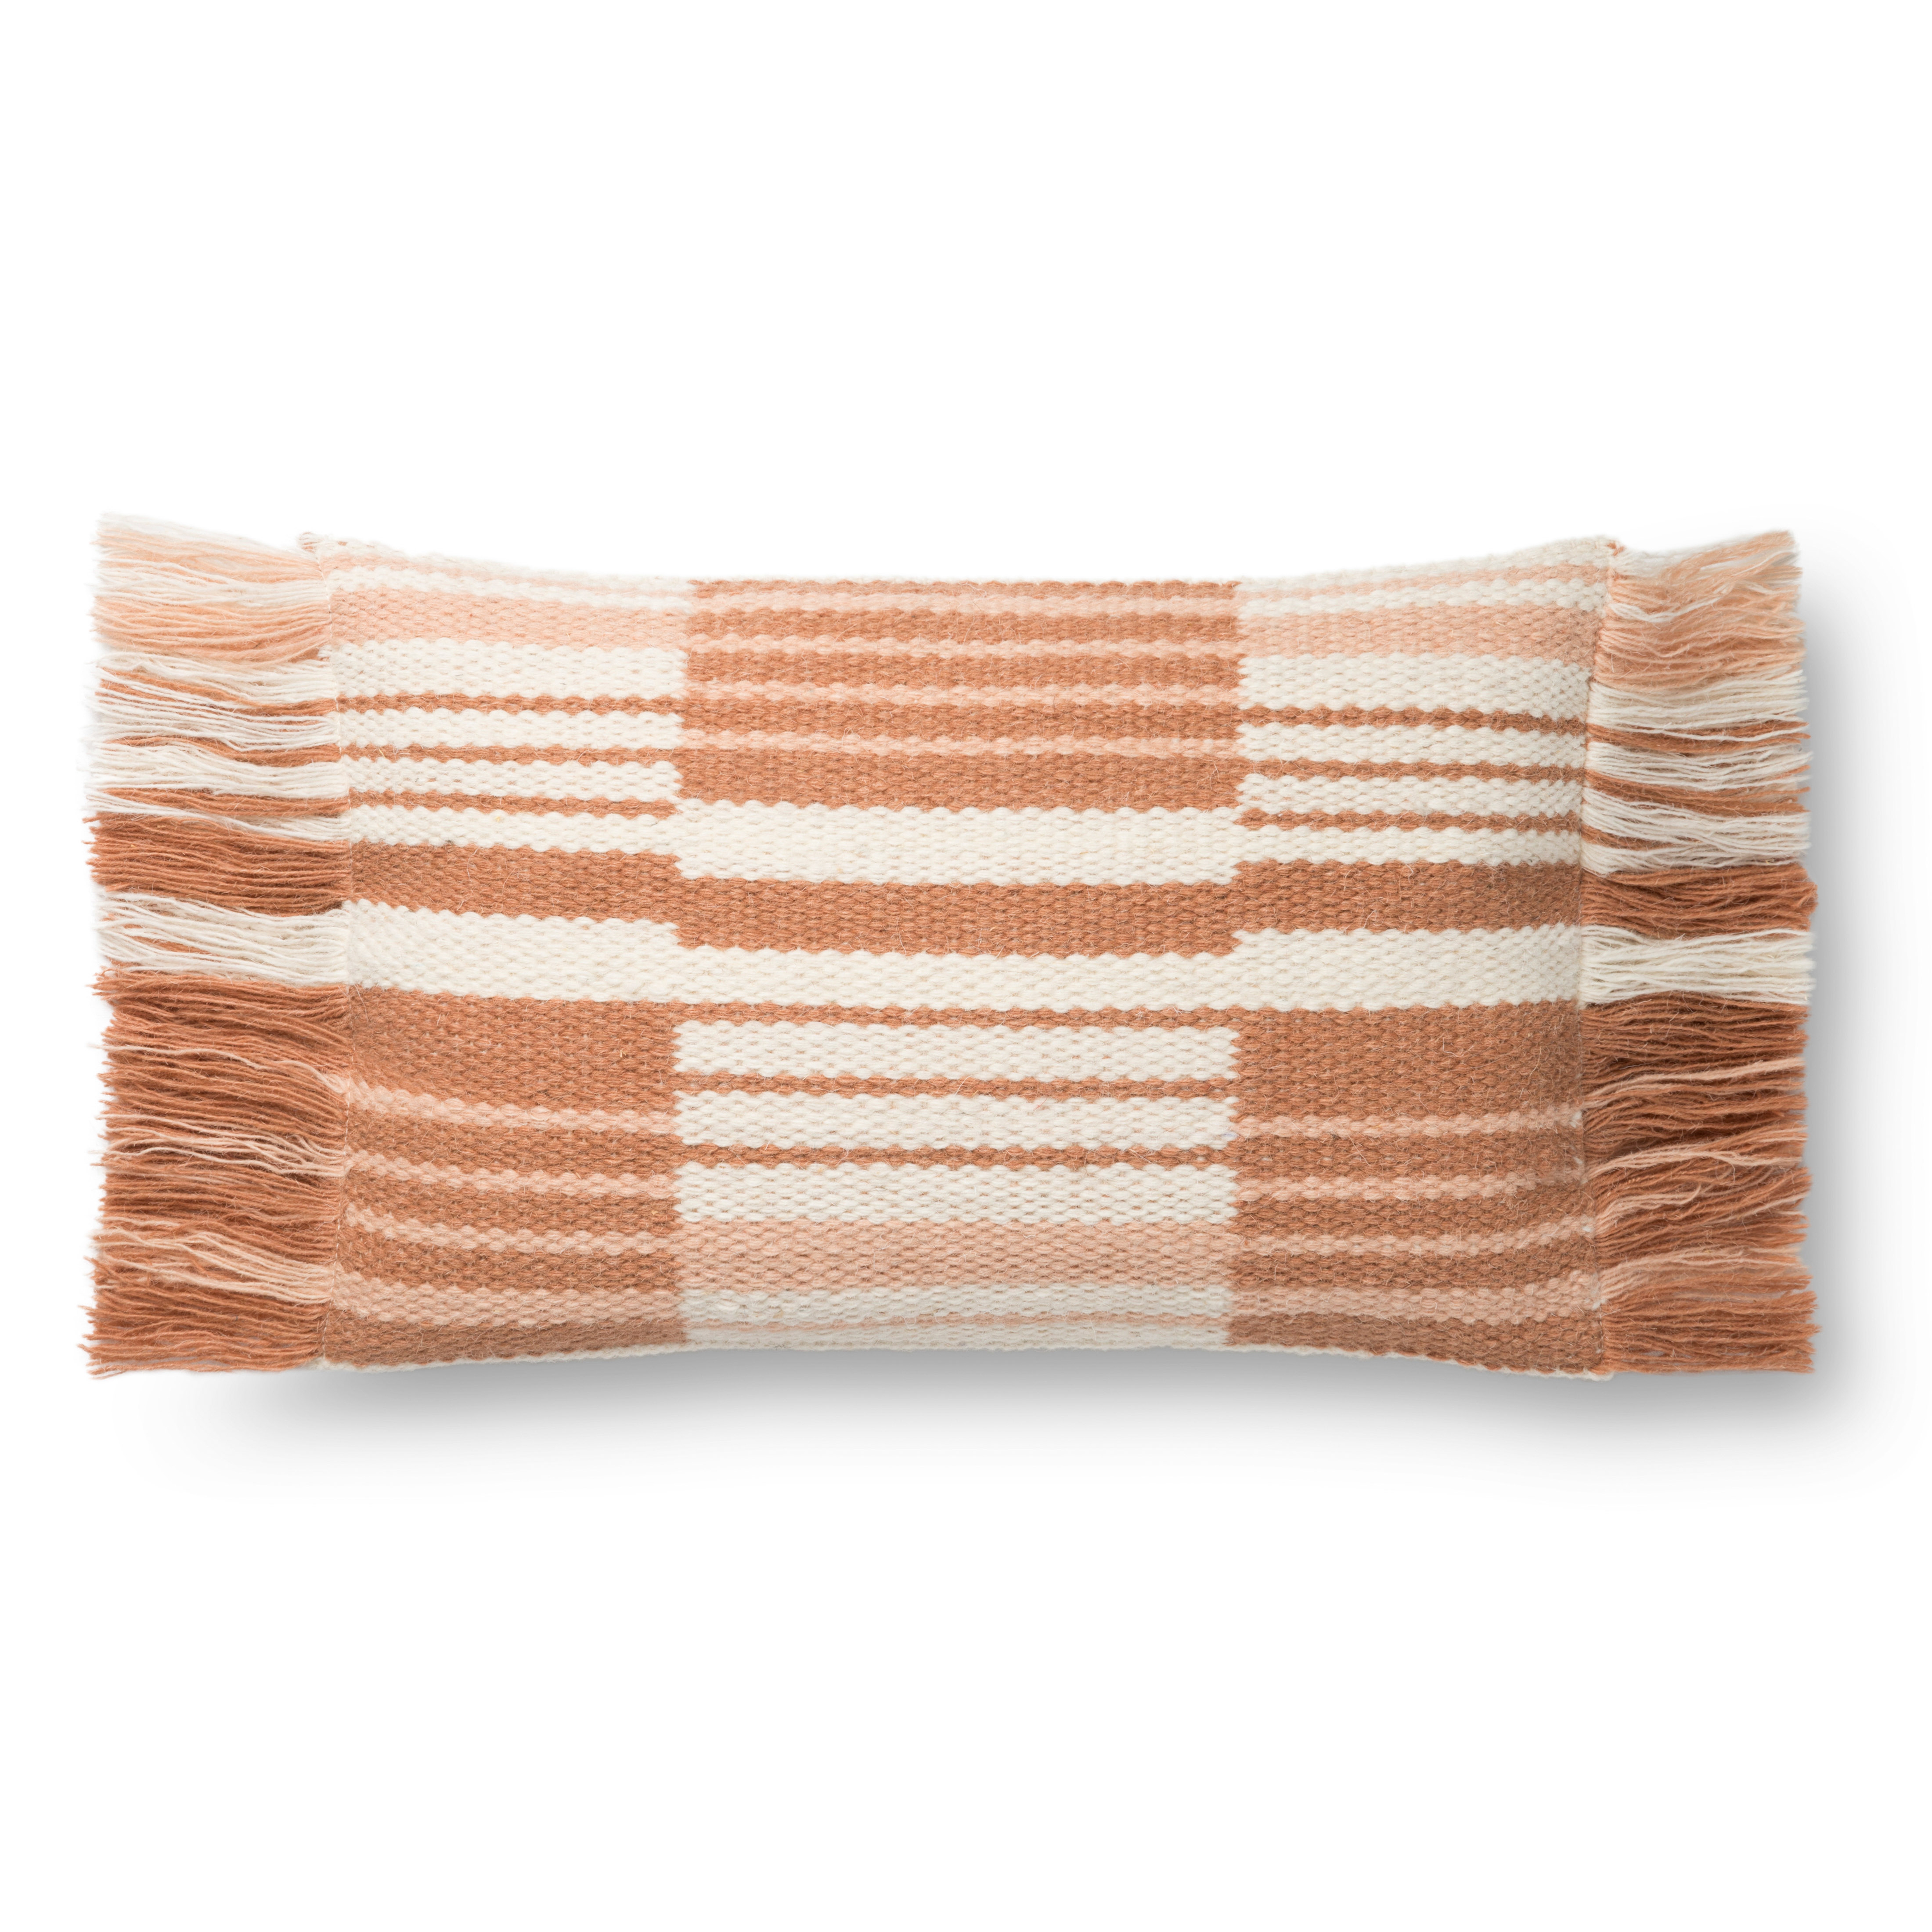 PILLOWS P1129 TERRACOTTA / IVORY 13" x 21" Cover w/Poly - Magnolia Home by Joana Gaines Crafted by Loloi Rugs